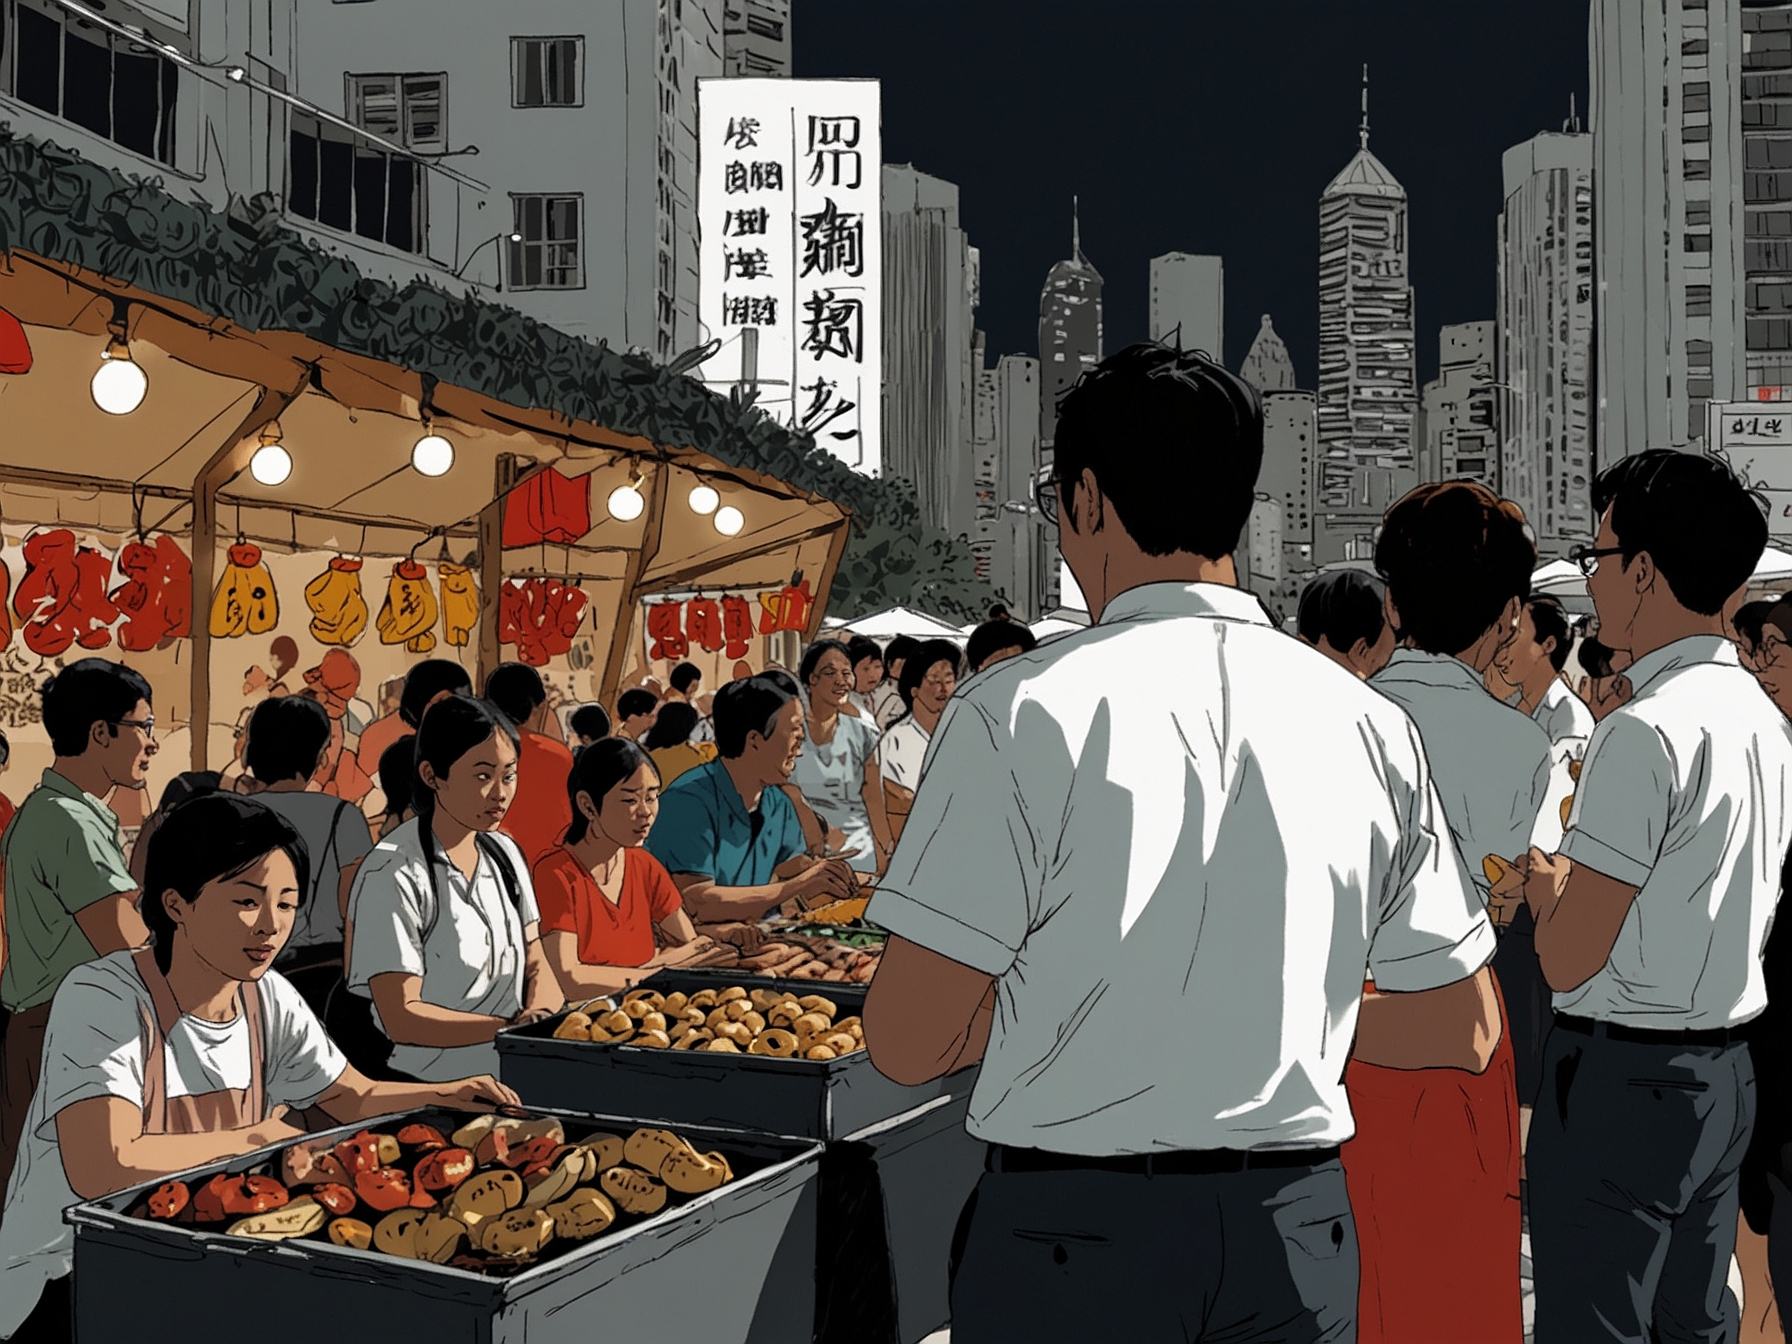 A traditional Portuguese festival being held in Hong Kong with a sparse crowd, showcasing local food and music.